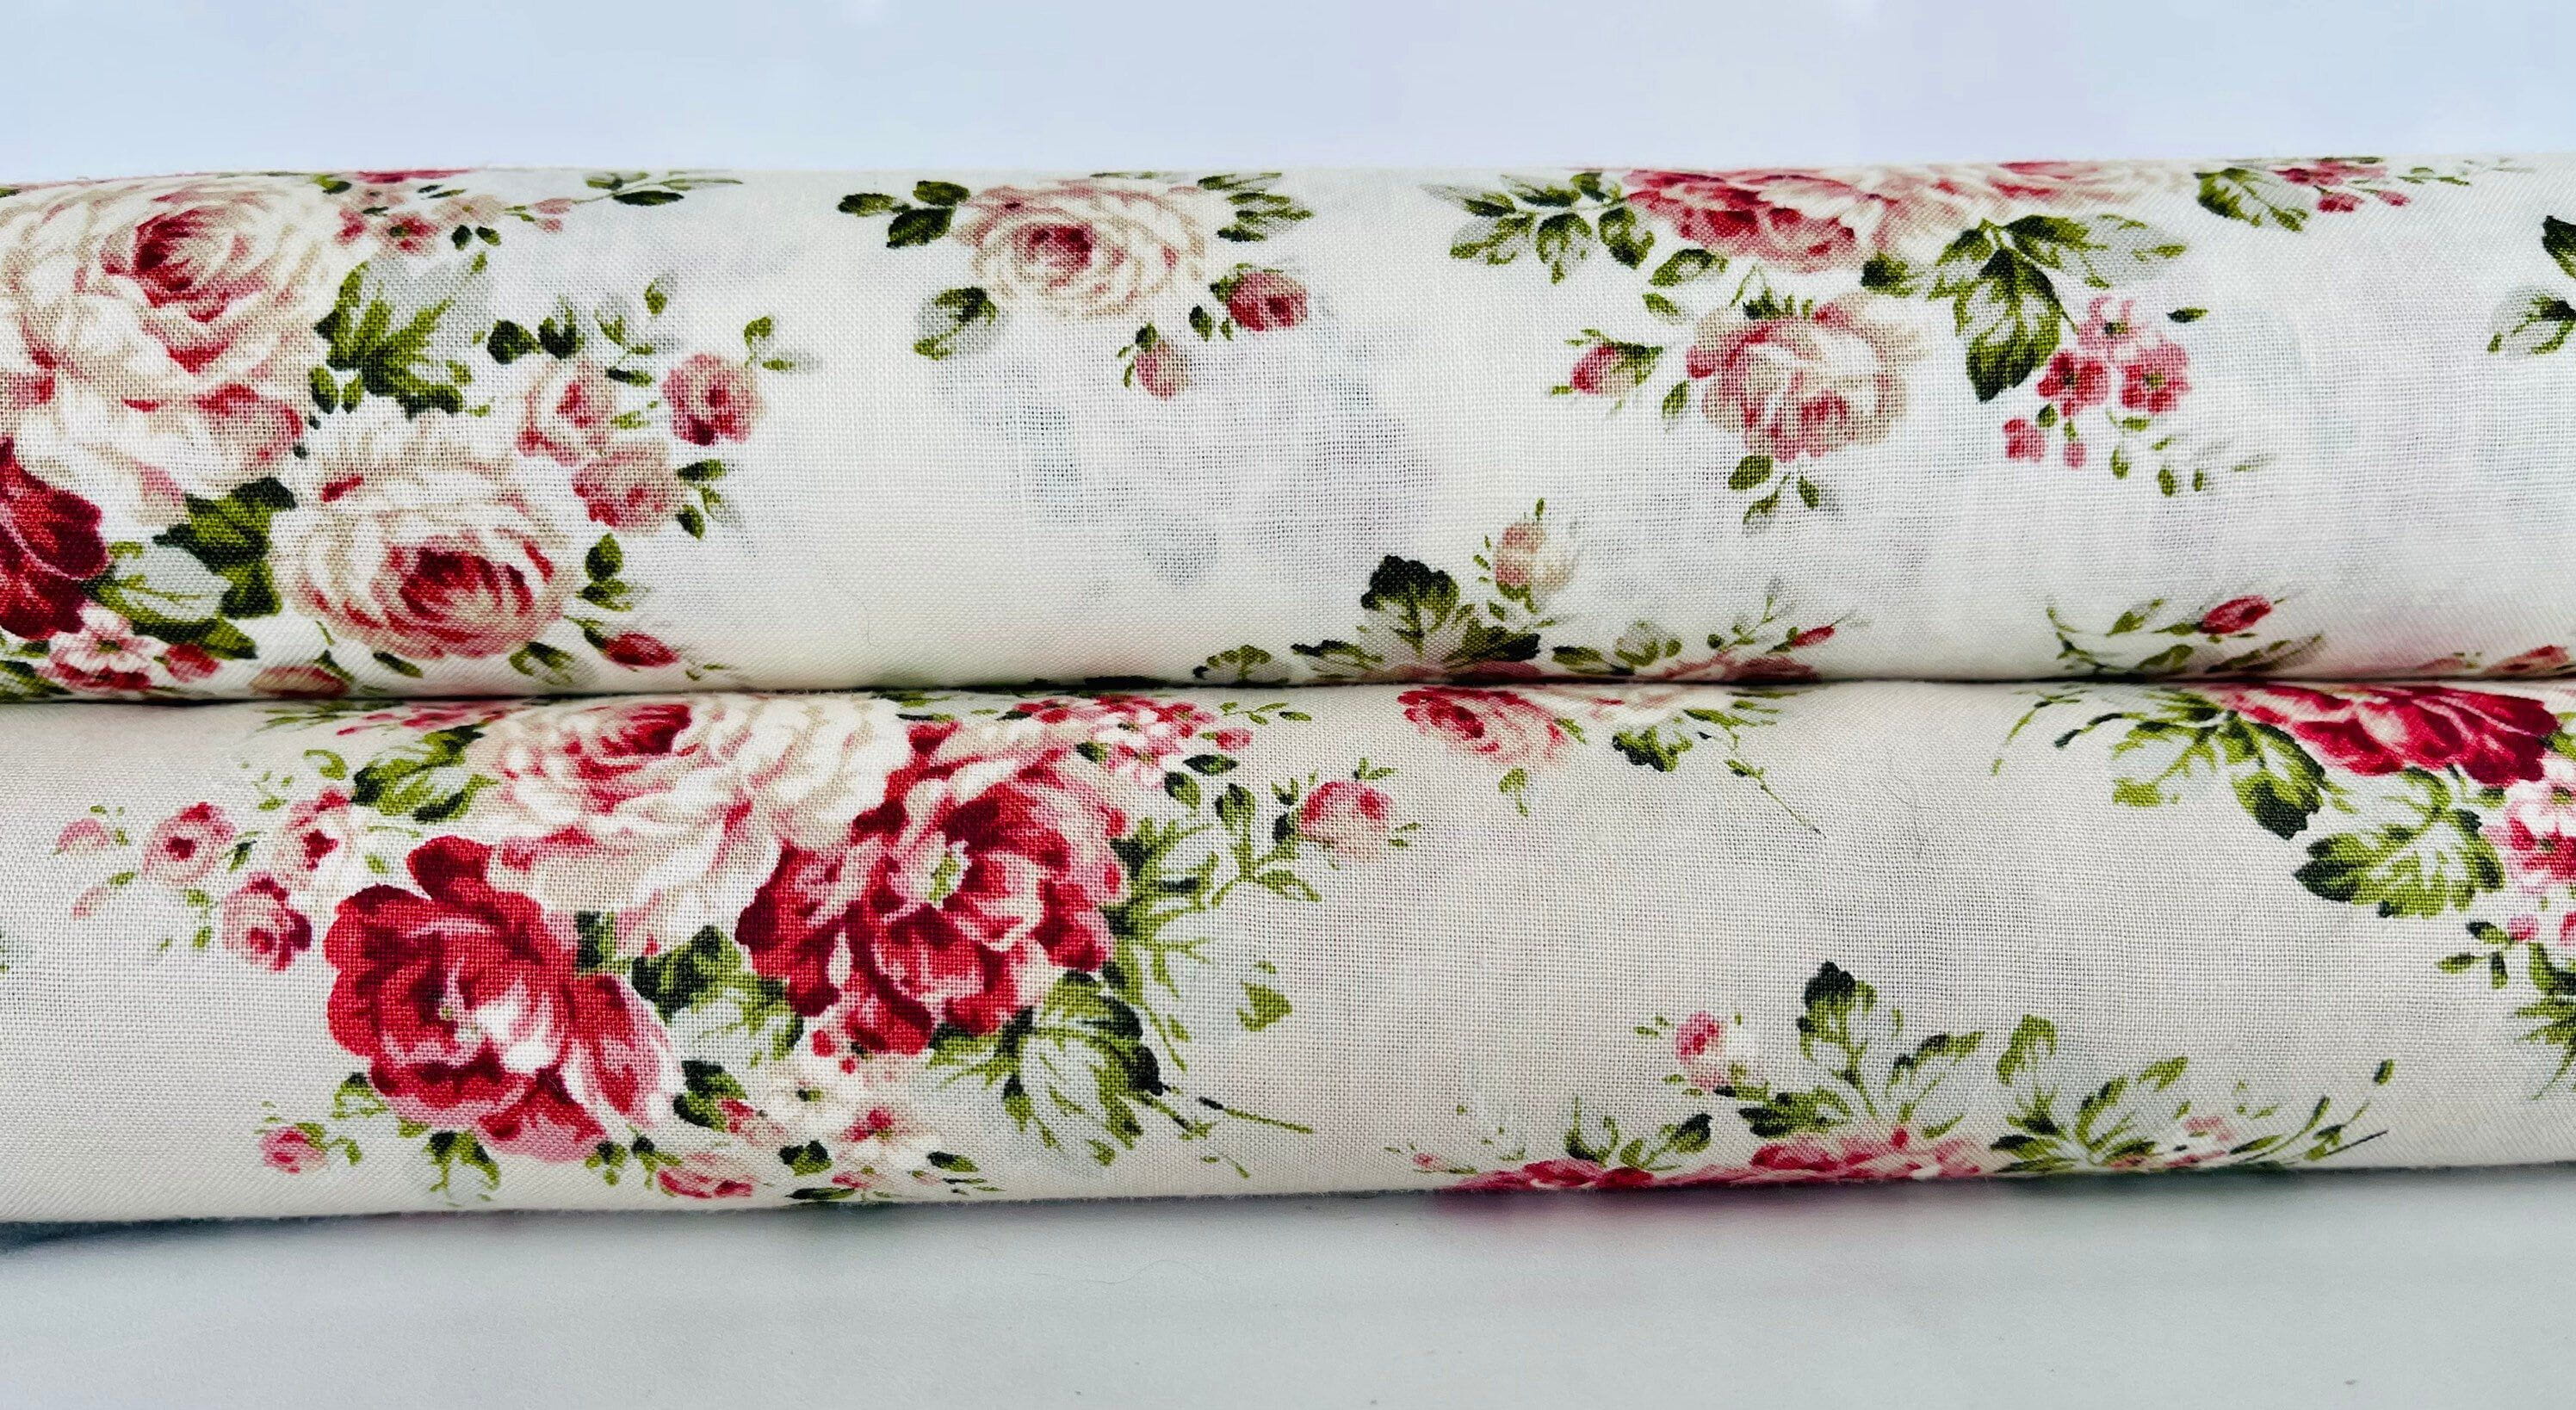 Country Floral - Nakamura - Japanese Fabric - Floral Fabric - Roses